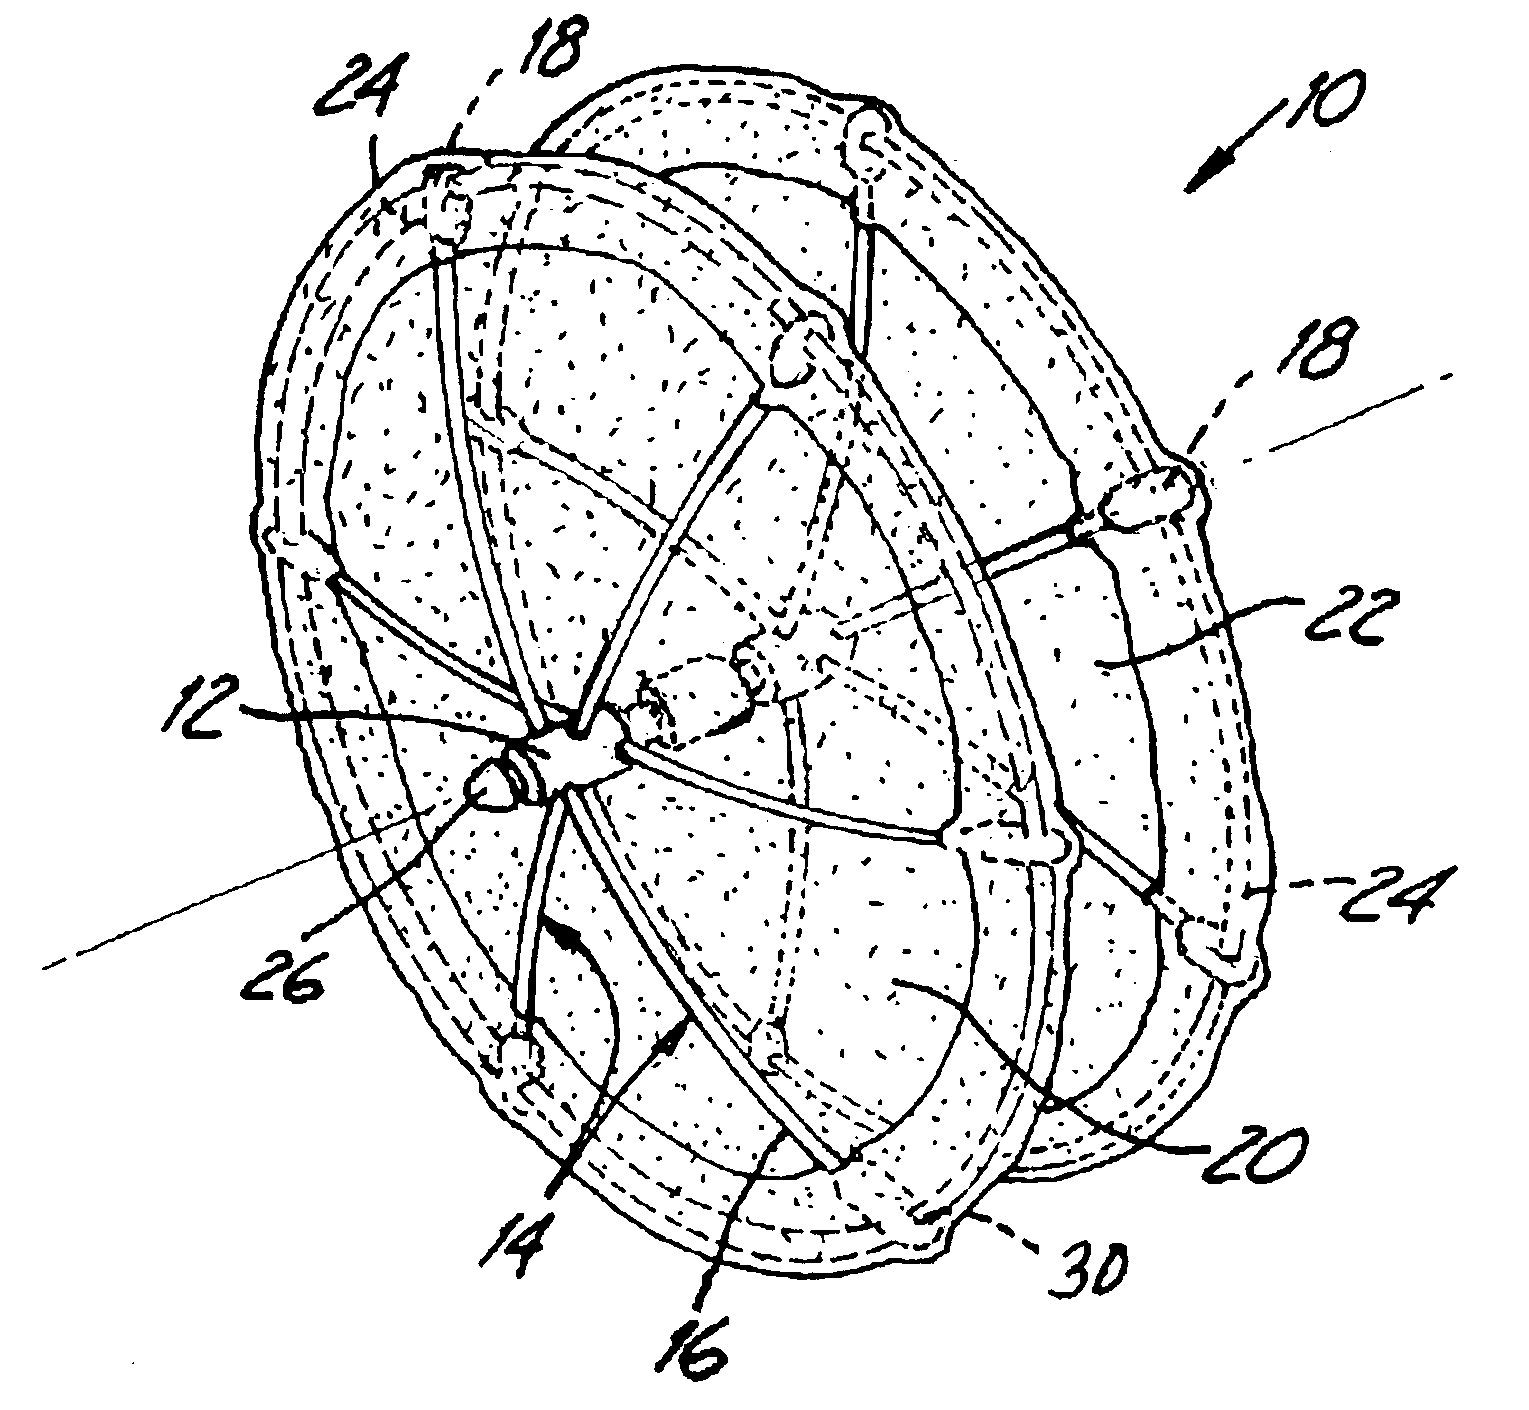 Hoop design for occlusion device